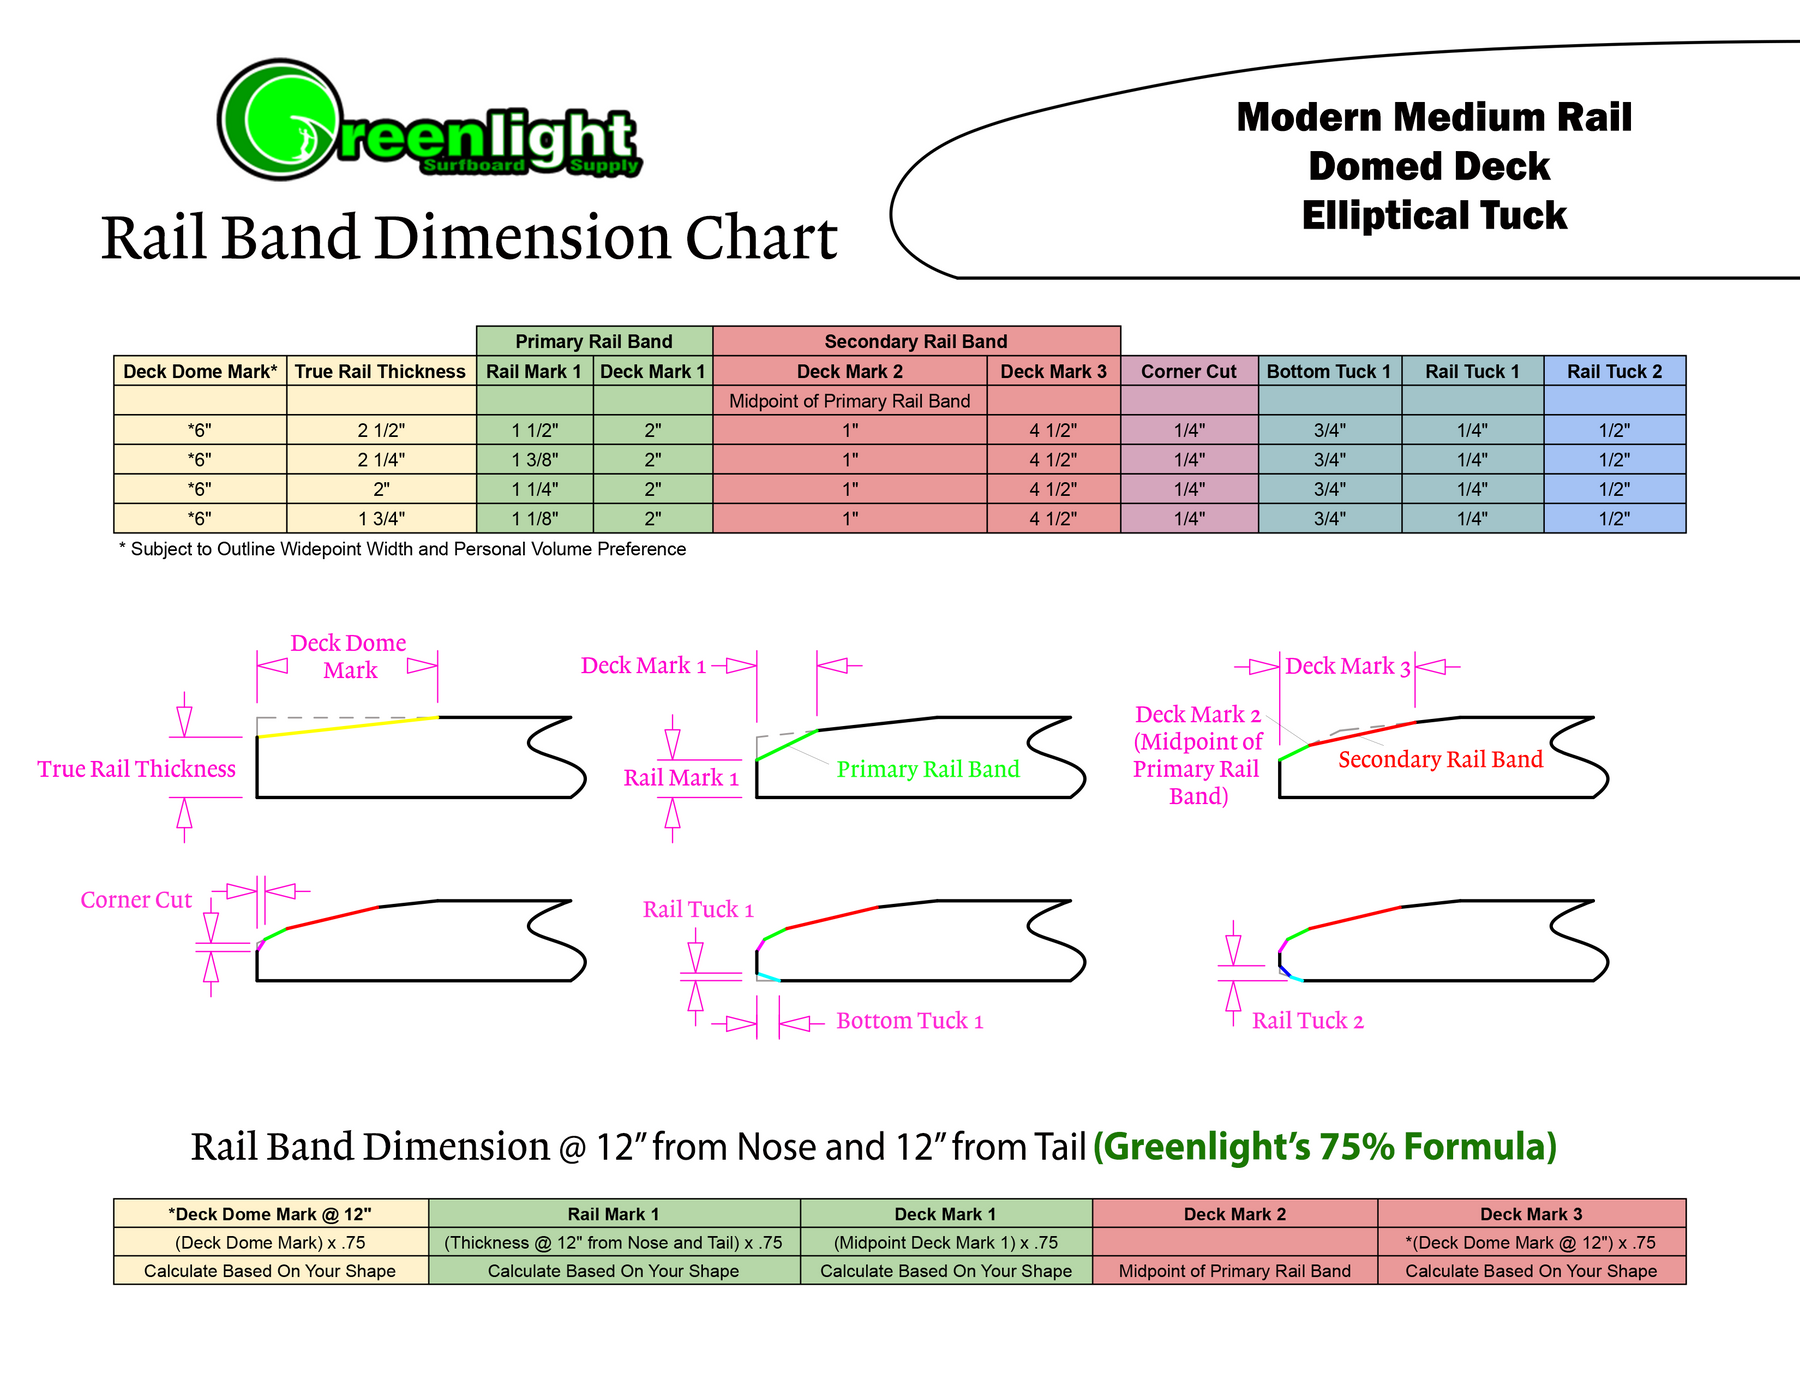 New Rail Band Dimension Chart with Domed Deck